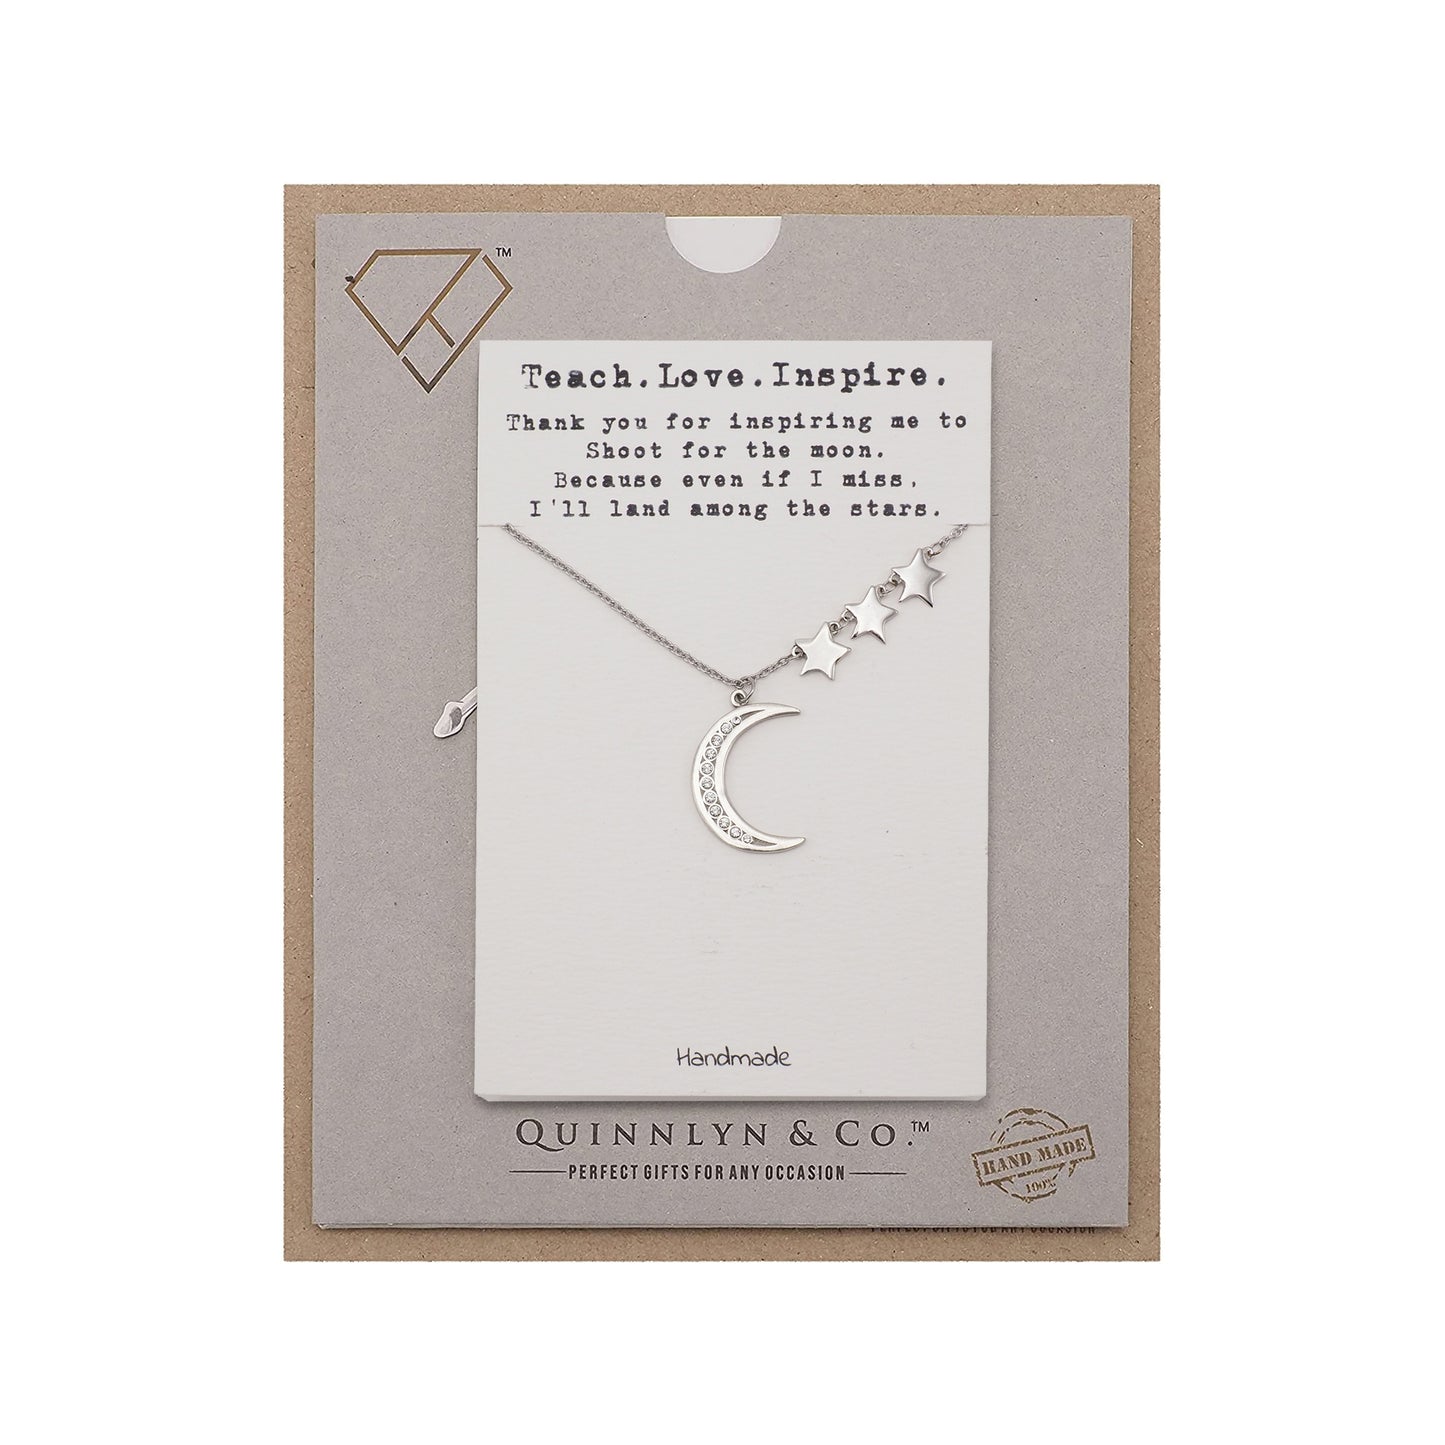 Quinnlyn & Co. 3 Stars and Crescent Moon Pendant Necklace, Teacher's Day Appreciation Gifts with Inspirational Quote on Greeting Card